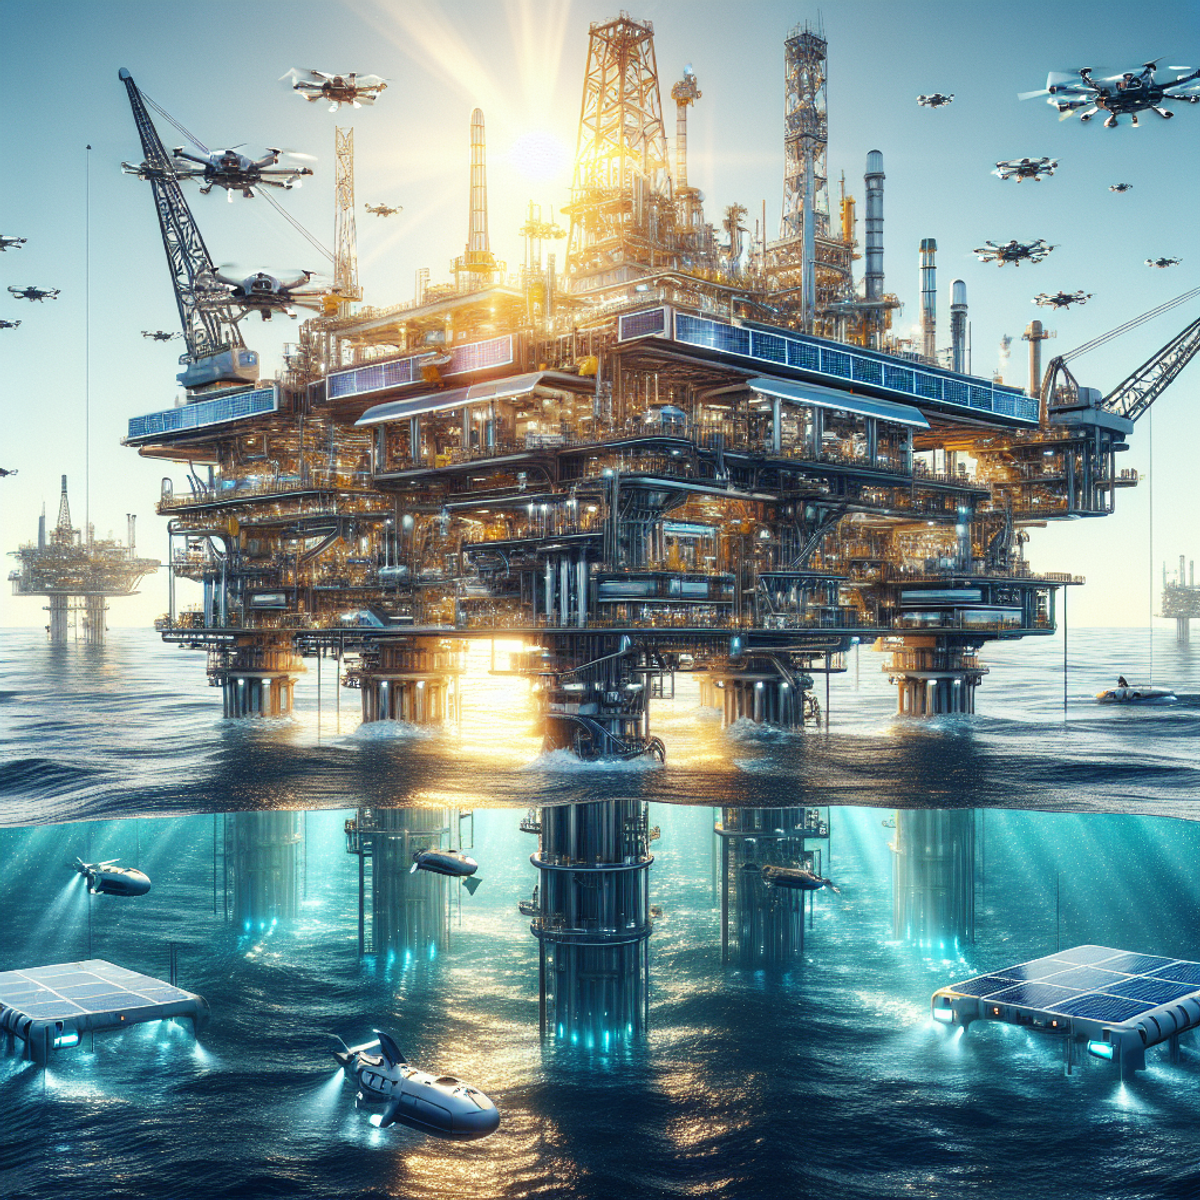 A futuristic offshore oil rig with advanced technology and autonomous drones.